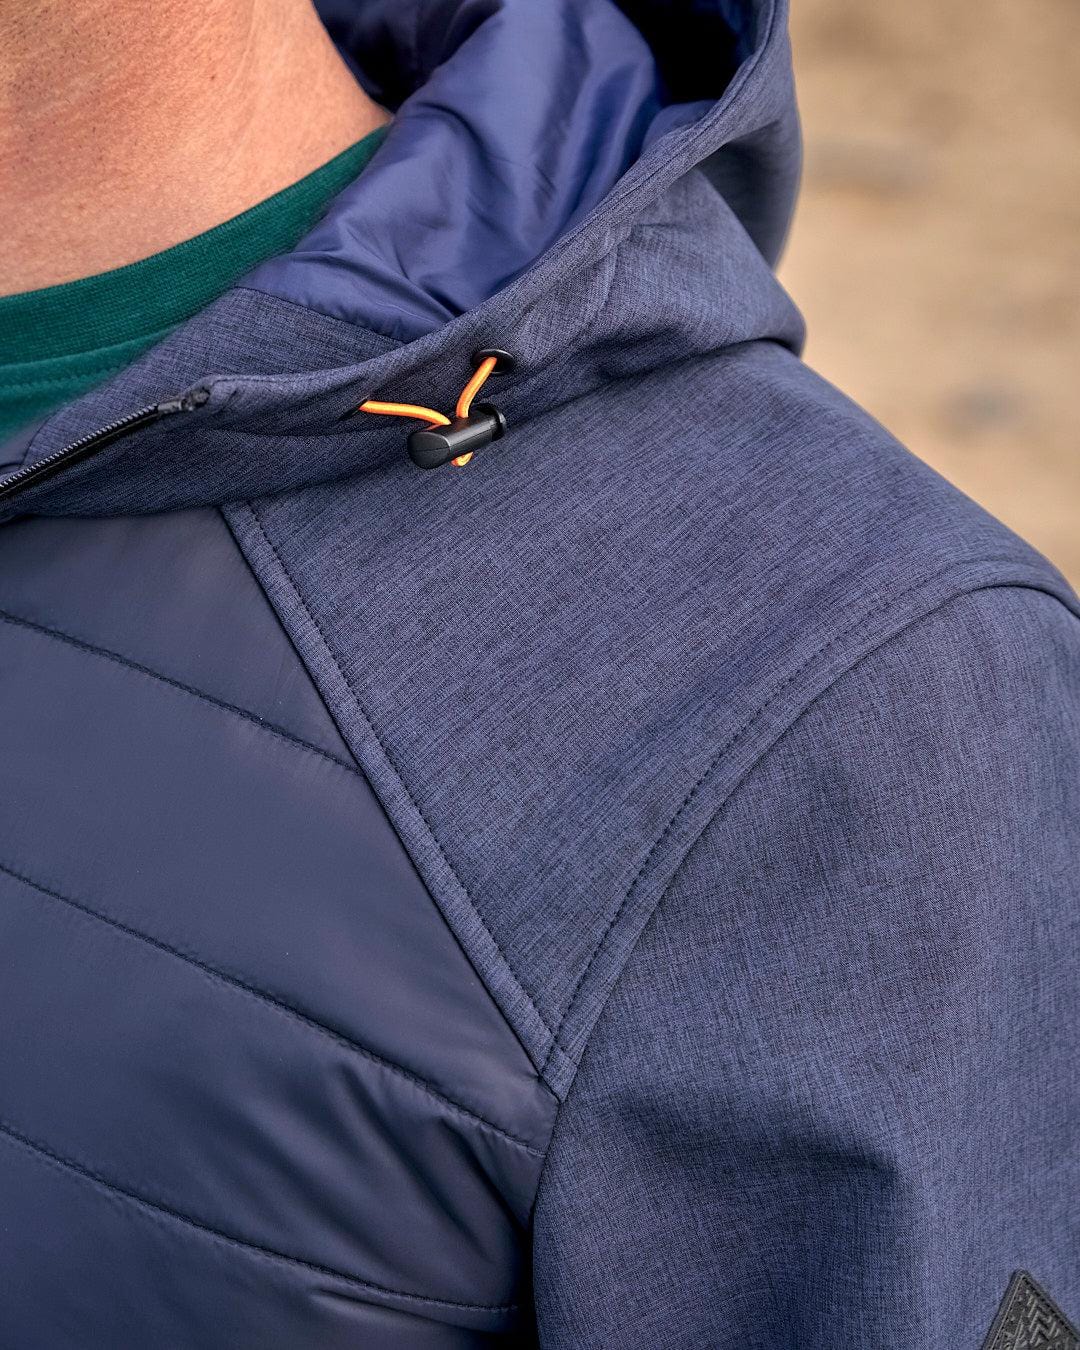 A close up of a man wearing the Saltrock Purbeck Padded Jacket - Dark Blue.